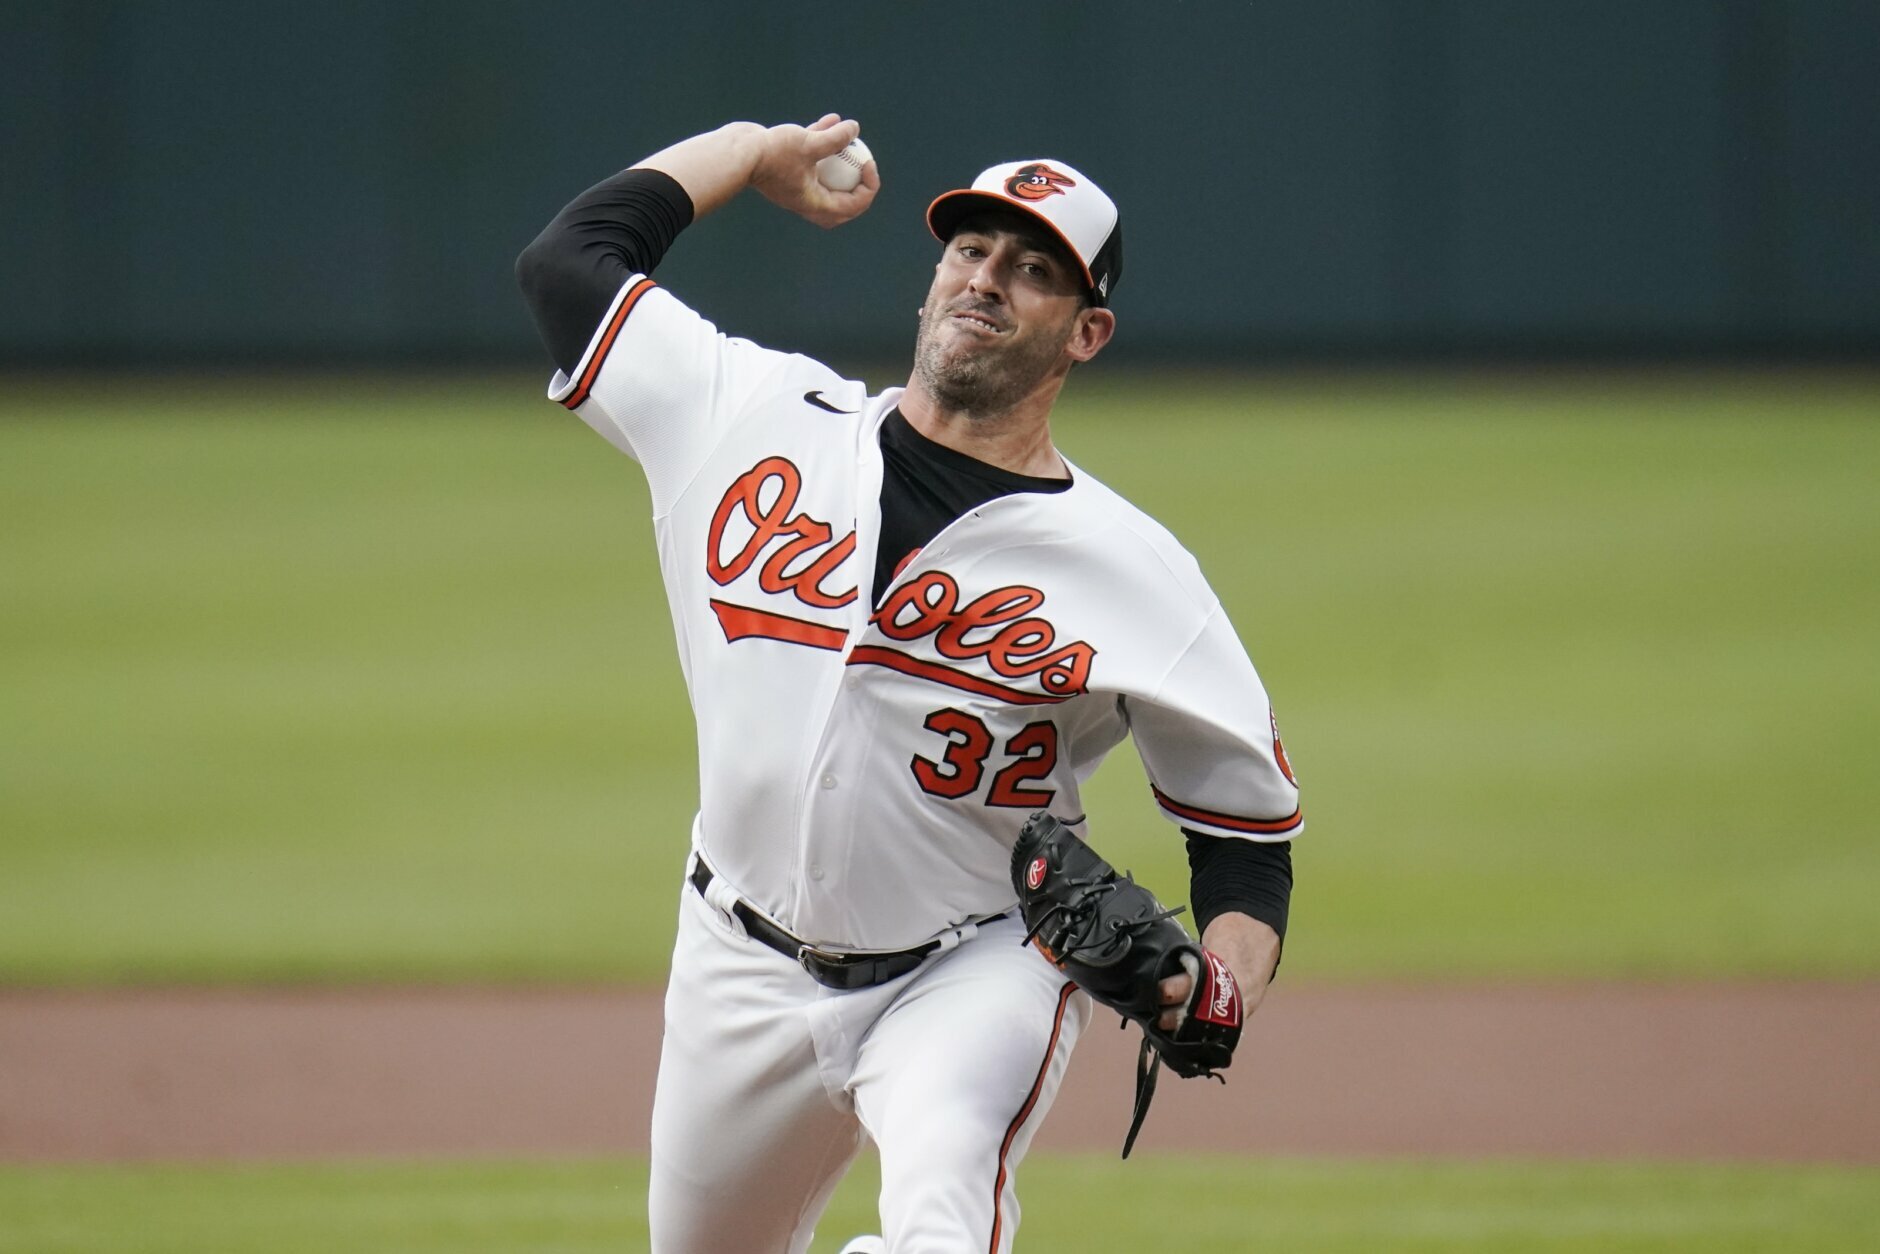 Baltimore Orioles starting pitcher Matt Harvey throws a pitch to the New York Mets during the first inning of a baseball game, Wednesday, June 9, 2021, in Baltimore. (AP Photo/Julio Cortez)